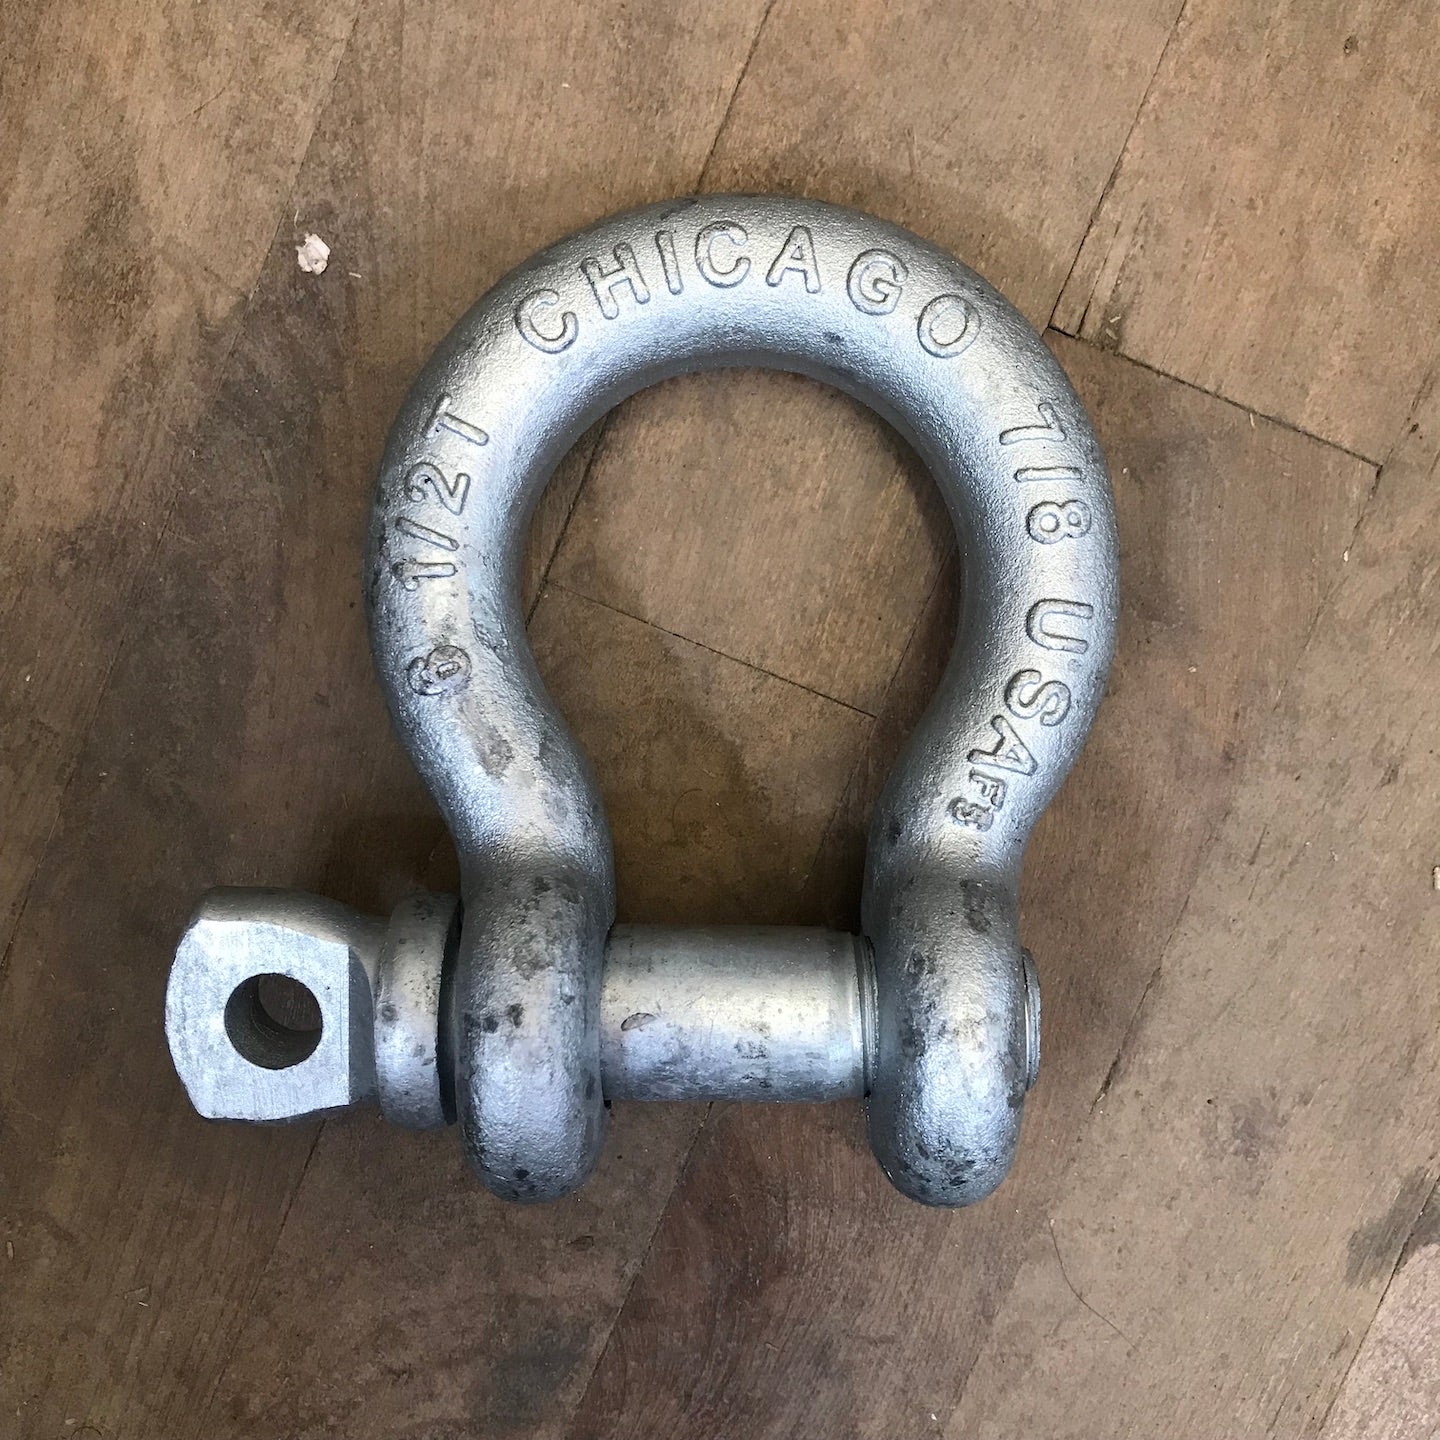 Chicago Hardware 7/8" Galvanized Anchor Screw Pin Shackle (20145-2)